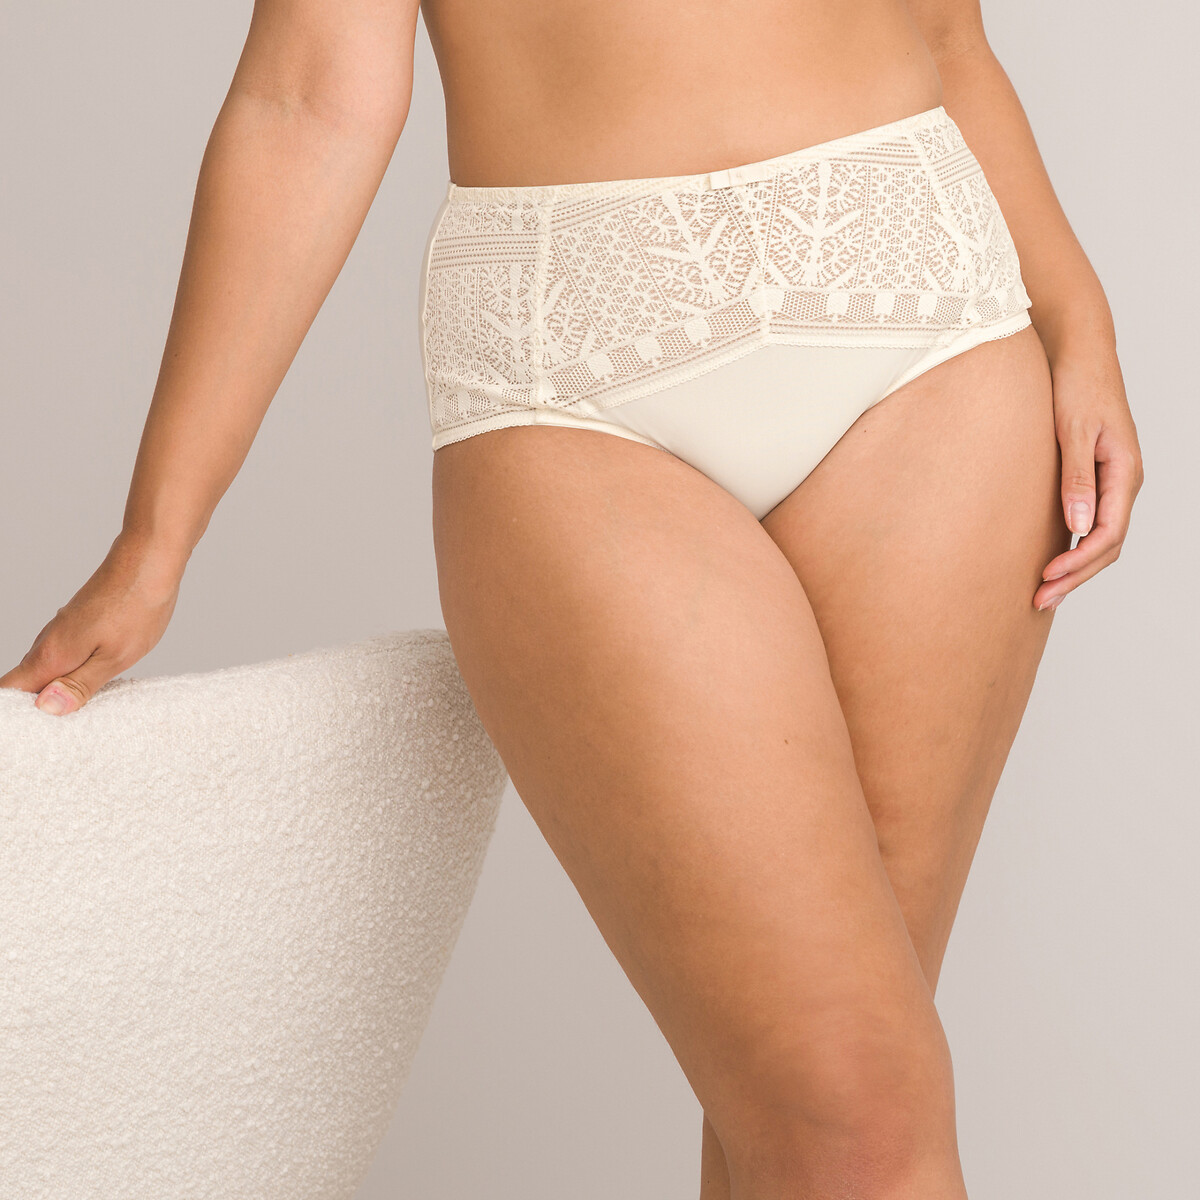 Women's microfibre and tulle knickers in Beige with polka dots